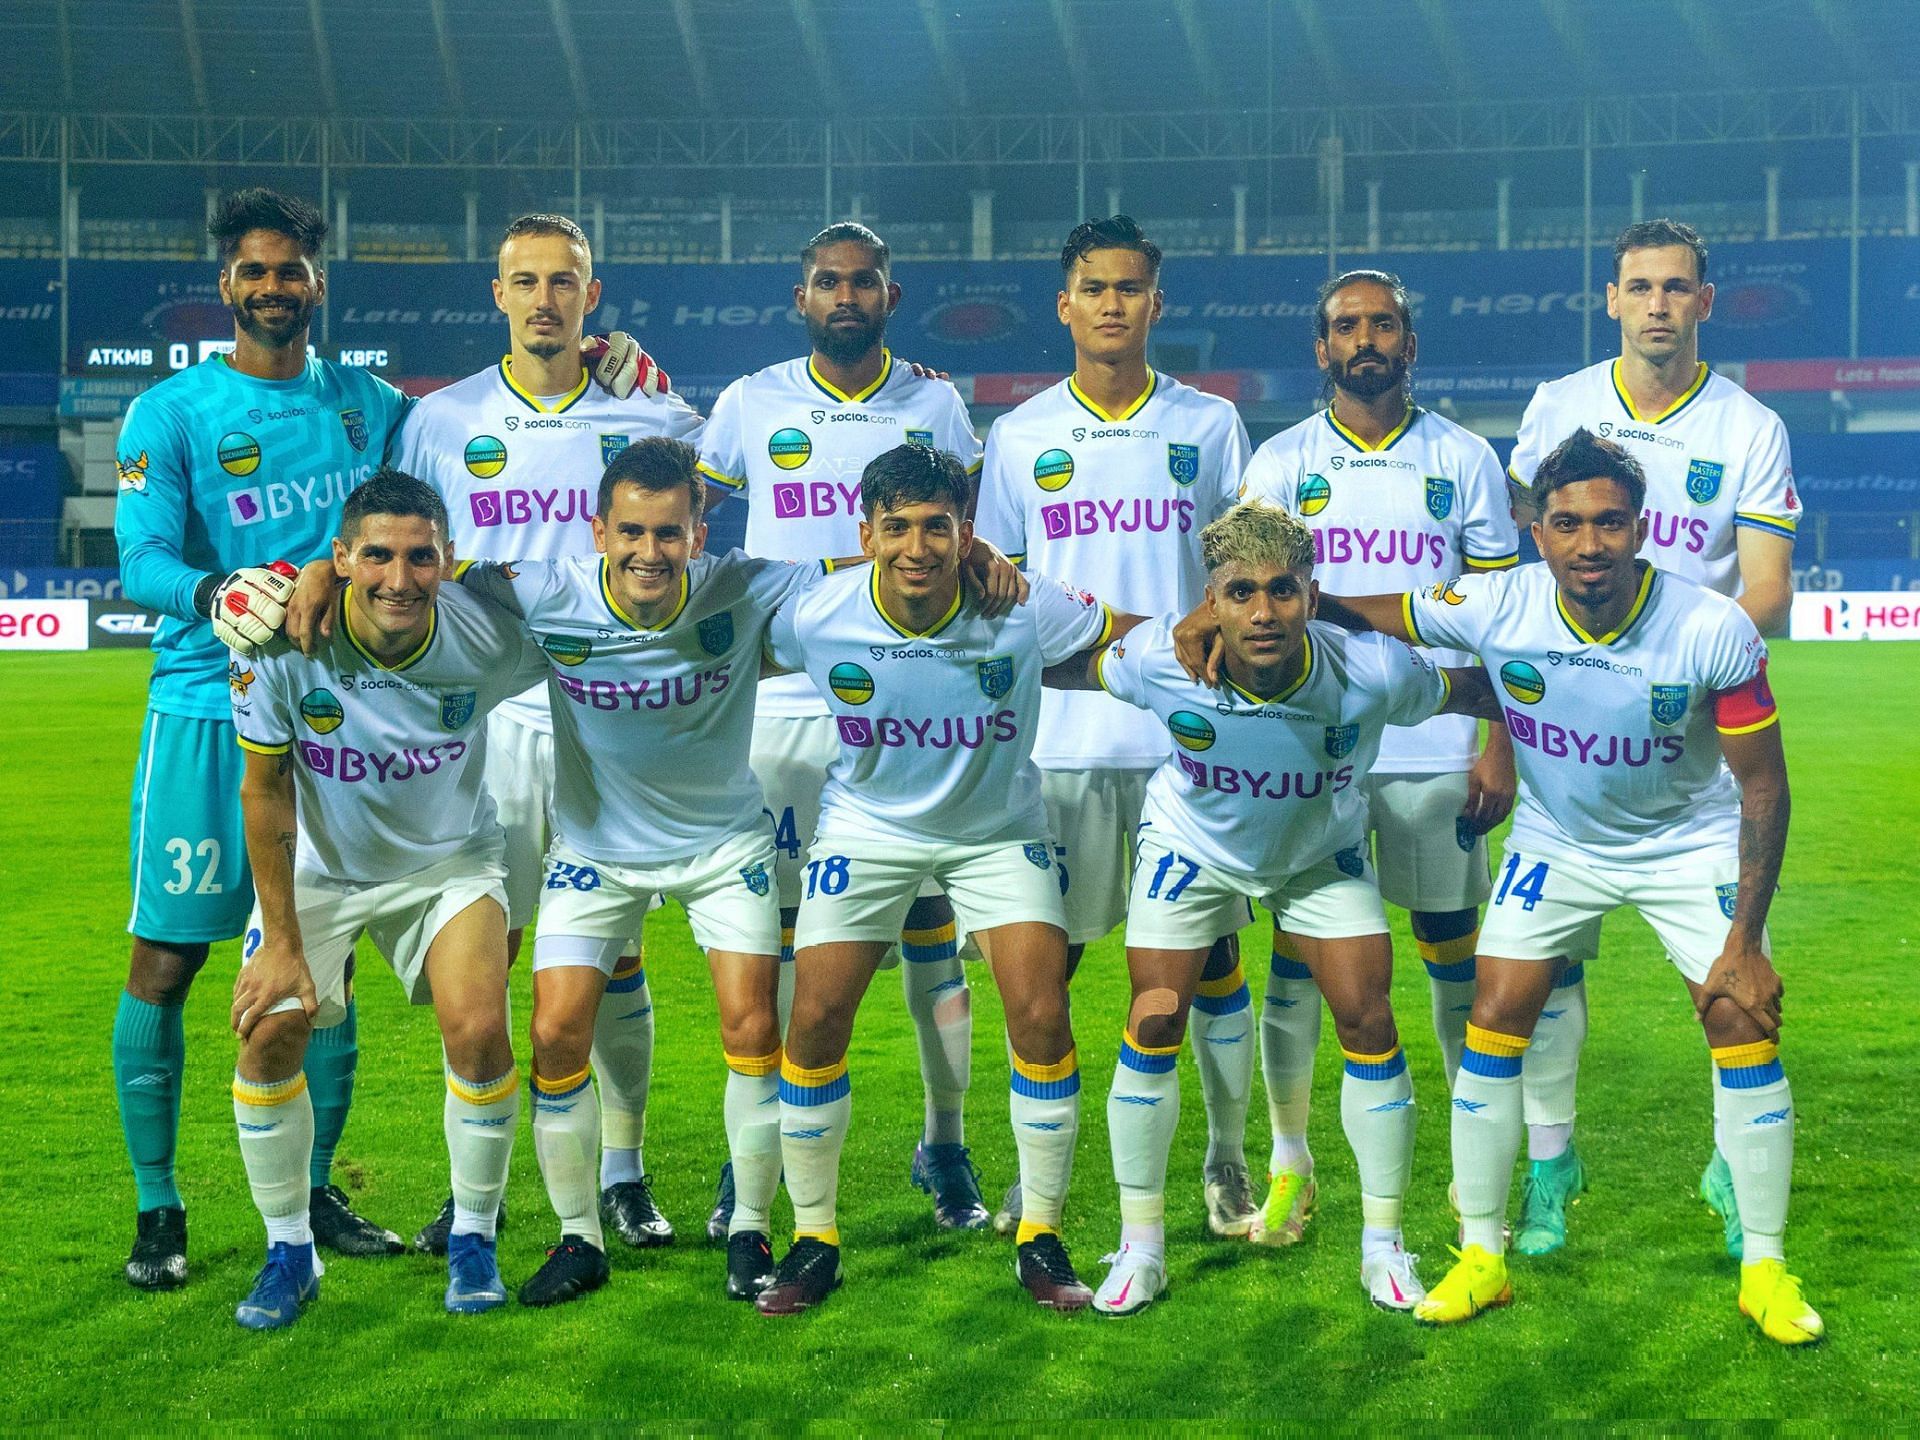 Kerala Blasters FC have lost three games in a row across the Durand Cup and ISL. (Image: Kerala Blasters FC)